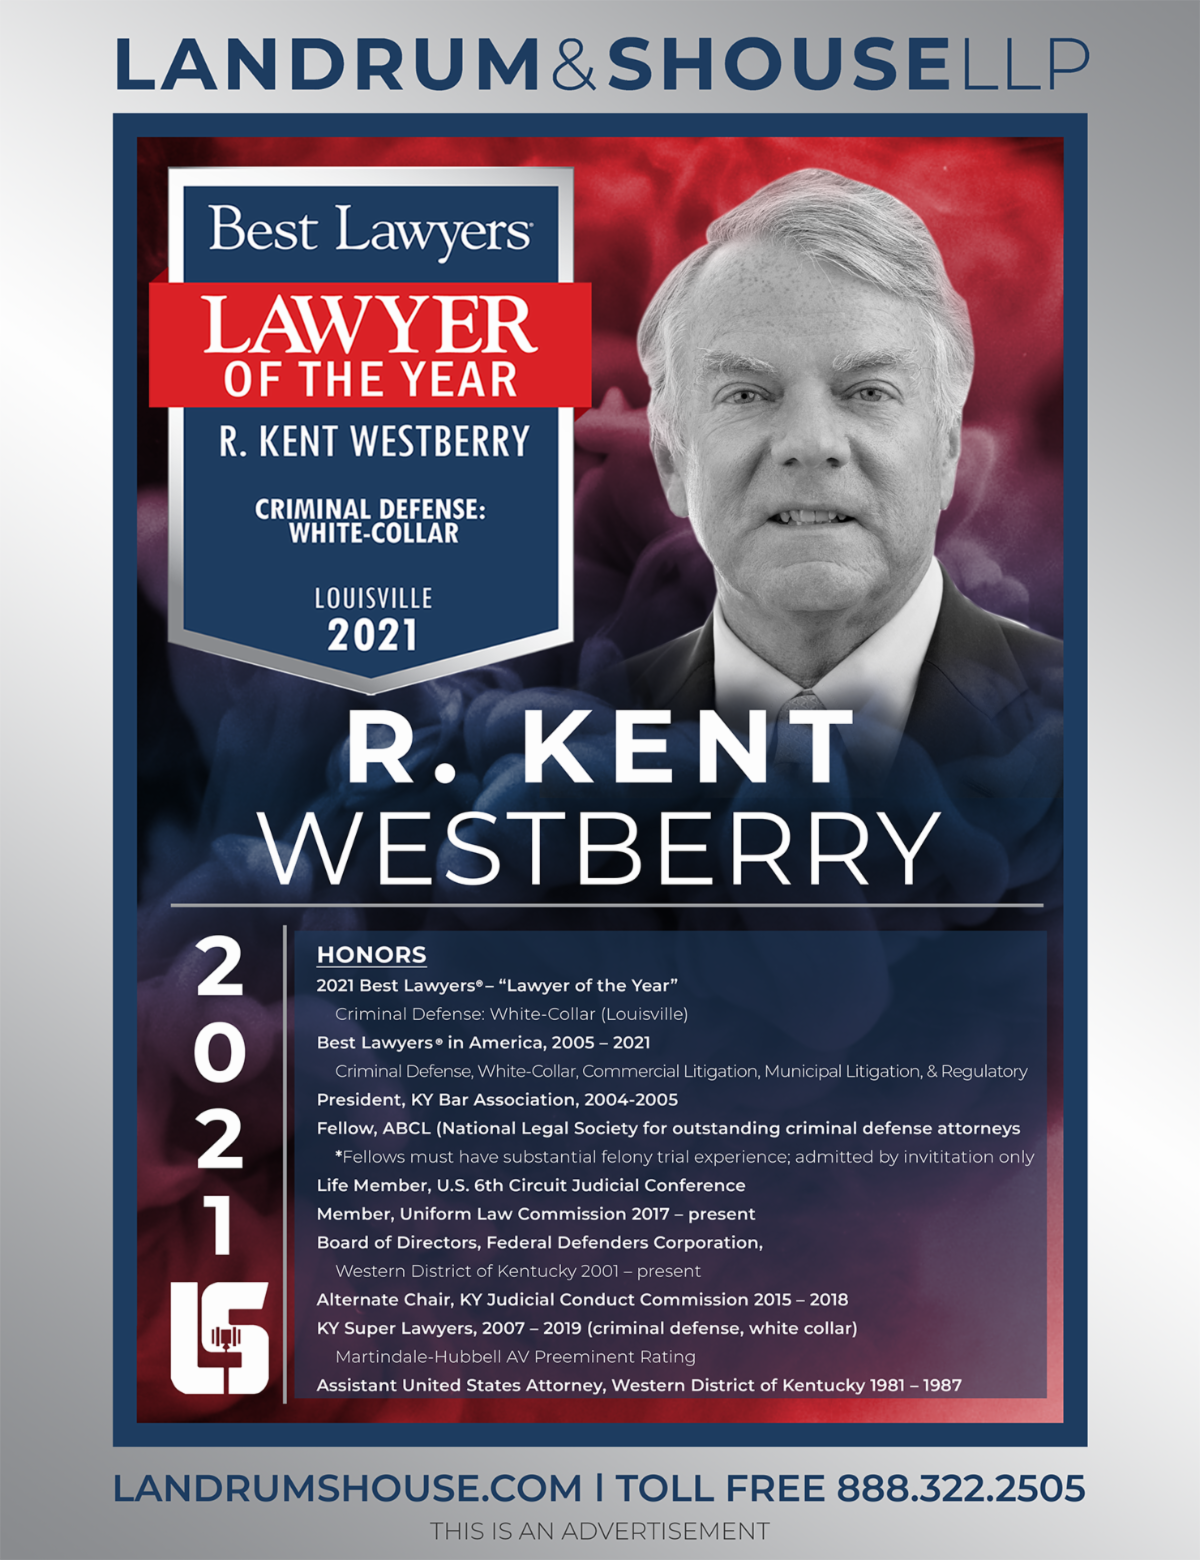 Landrum & Shouse LLP | Best Lawyers Lawyer of the Year R. Kent Westberry | Criminal Defense: White-Collar Louisville 2021 